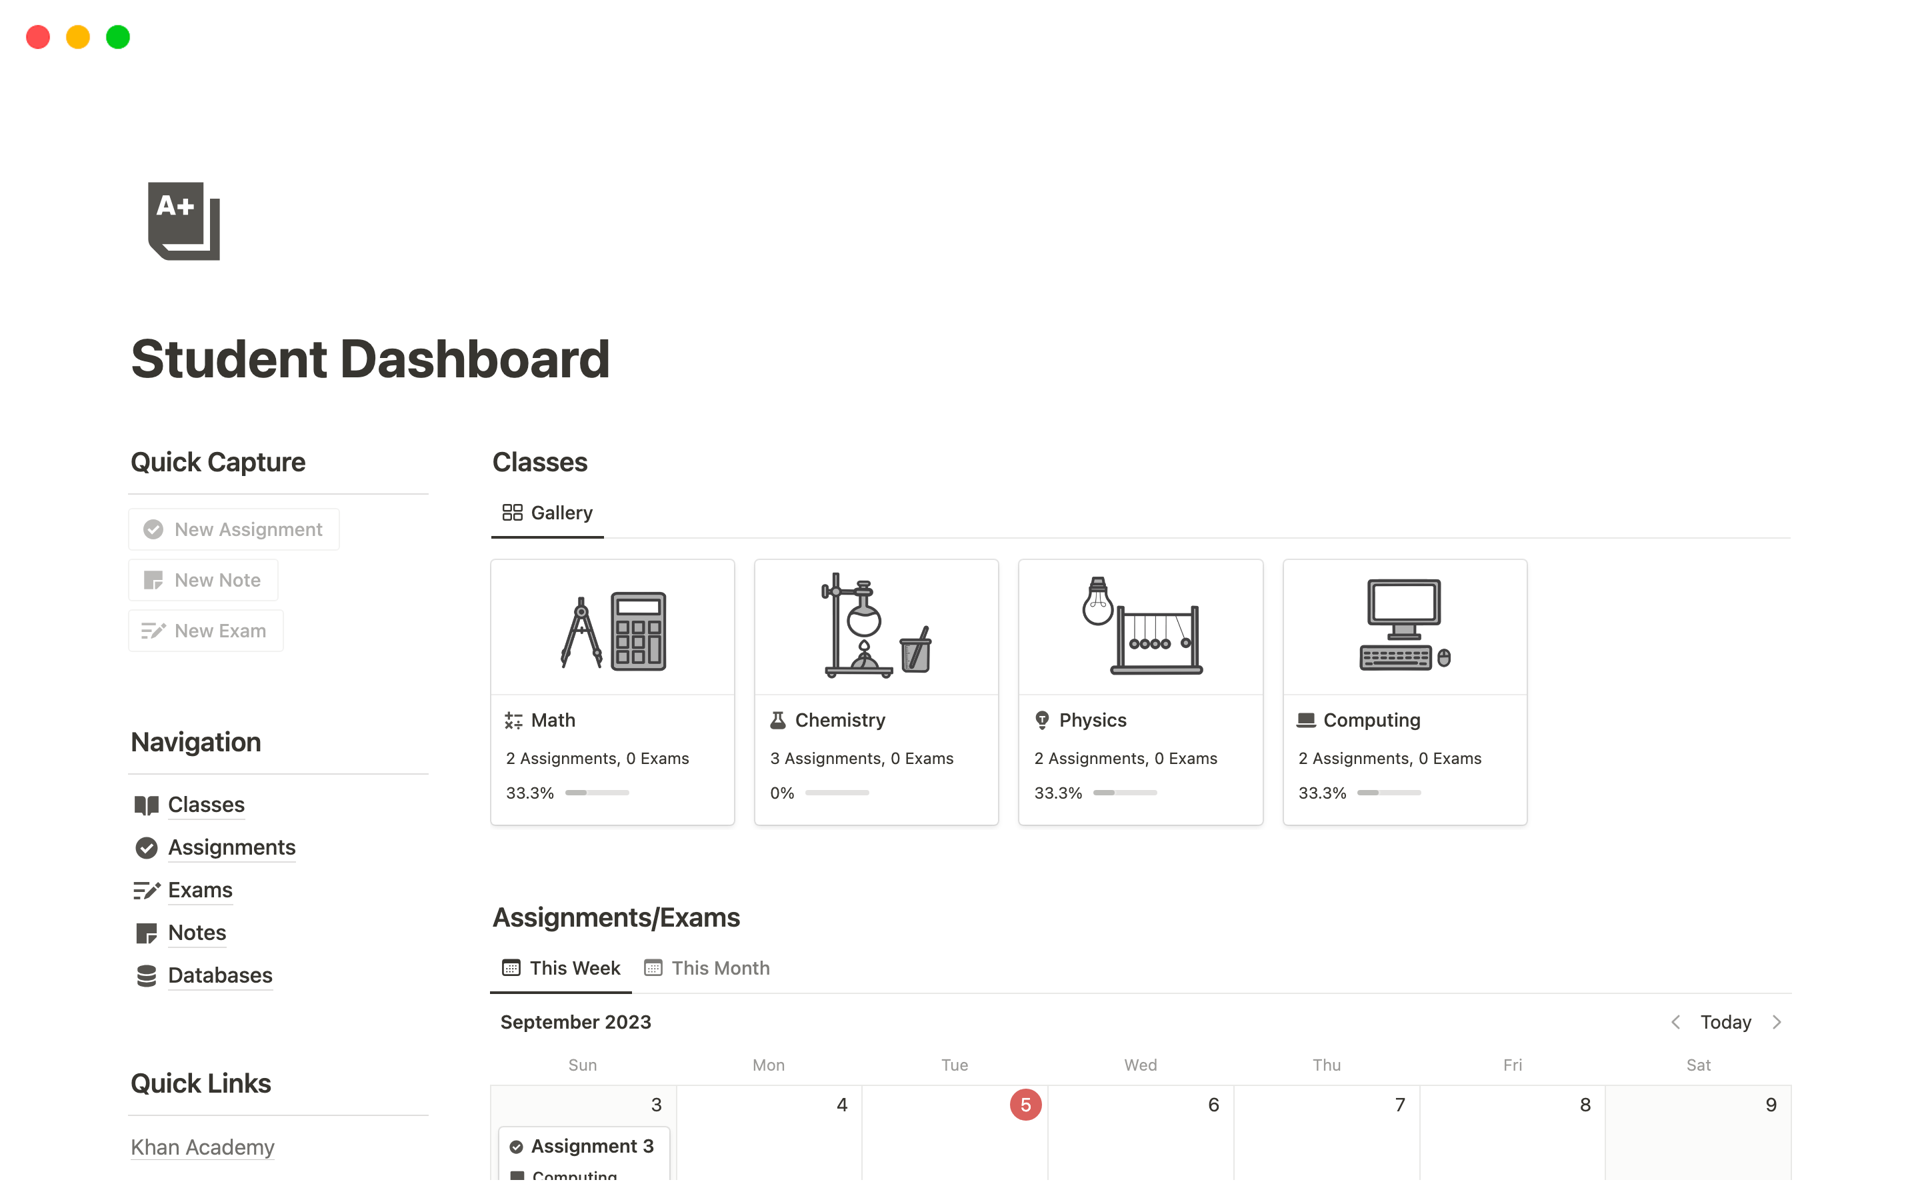 Empower students with a structured dashboard to manage their academic life.